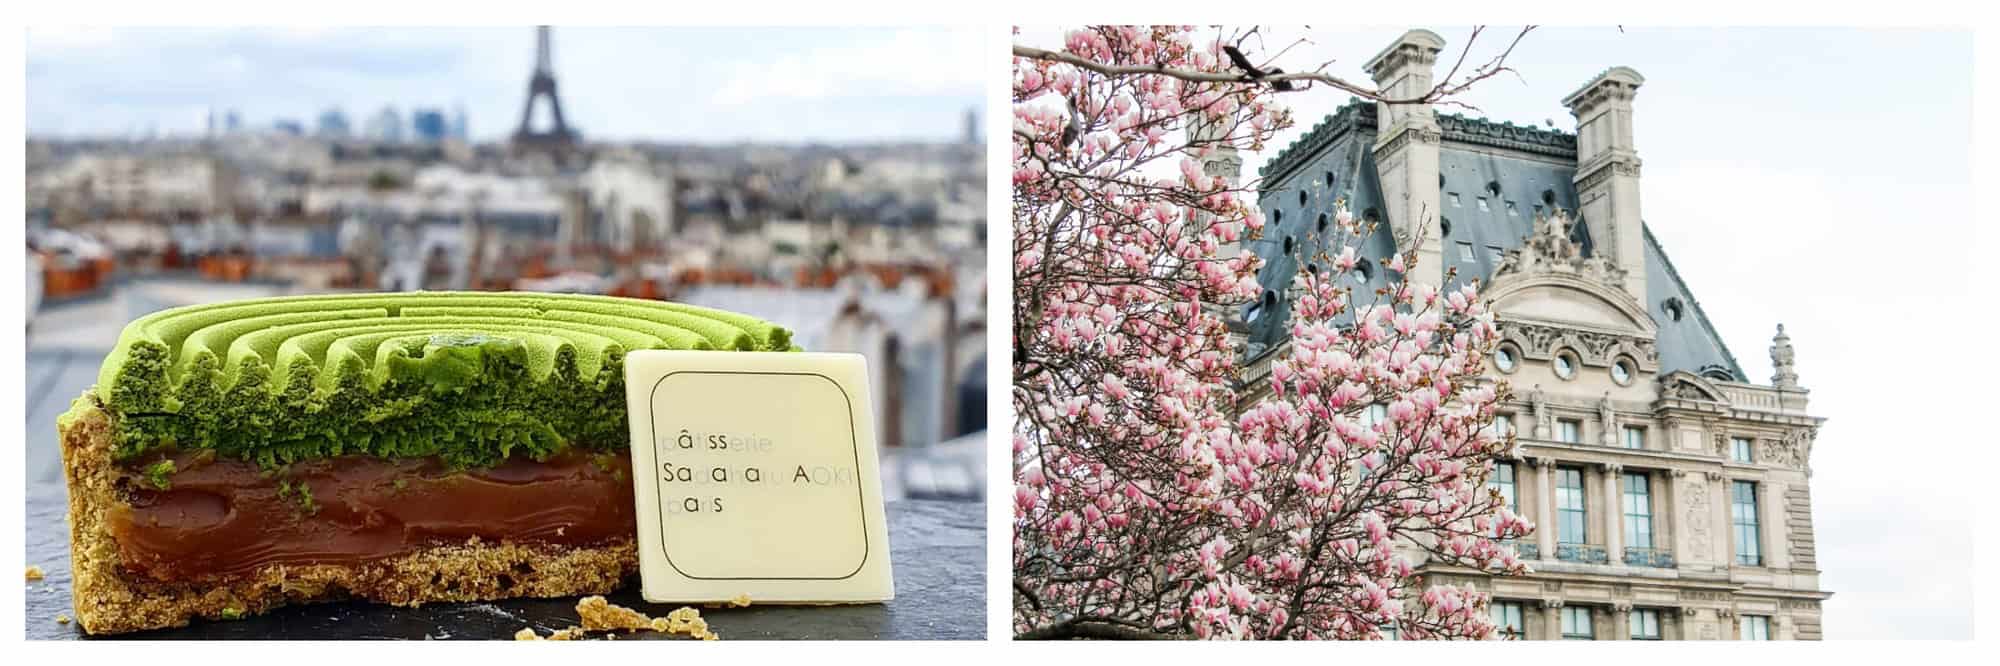 Left: A picture of Patisserie Sadaharu Aoki’s famous Tarte au Caramel Salé Matcha that has been sliced in the middle to show the caramel filling inside. This tart has a bright green top and brown crusts. The background of this photo are Parisian rooftops, the Eiffel Tower, and the buildings of La Defense. Right: Pictured is a Magnolia tree in full bloom of pink flowers at the Tuilleries Garden and behind it is one of the towers of the Louvre.